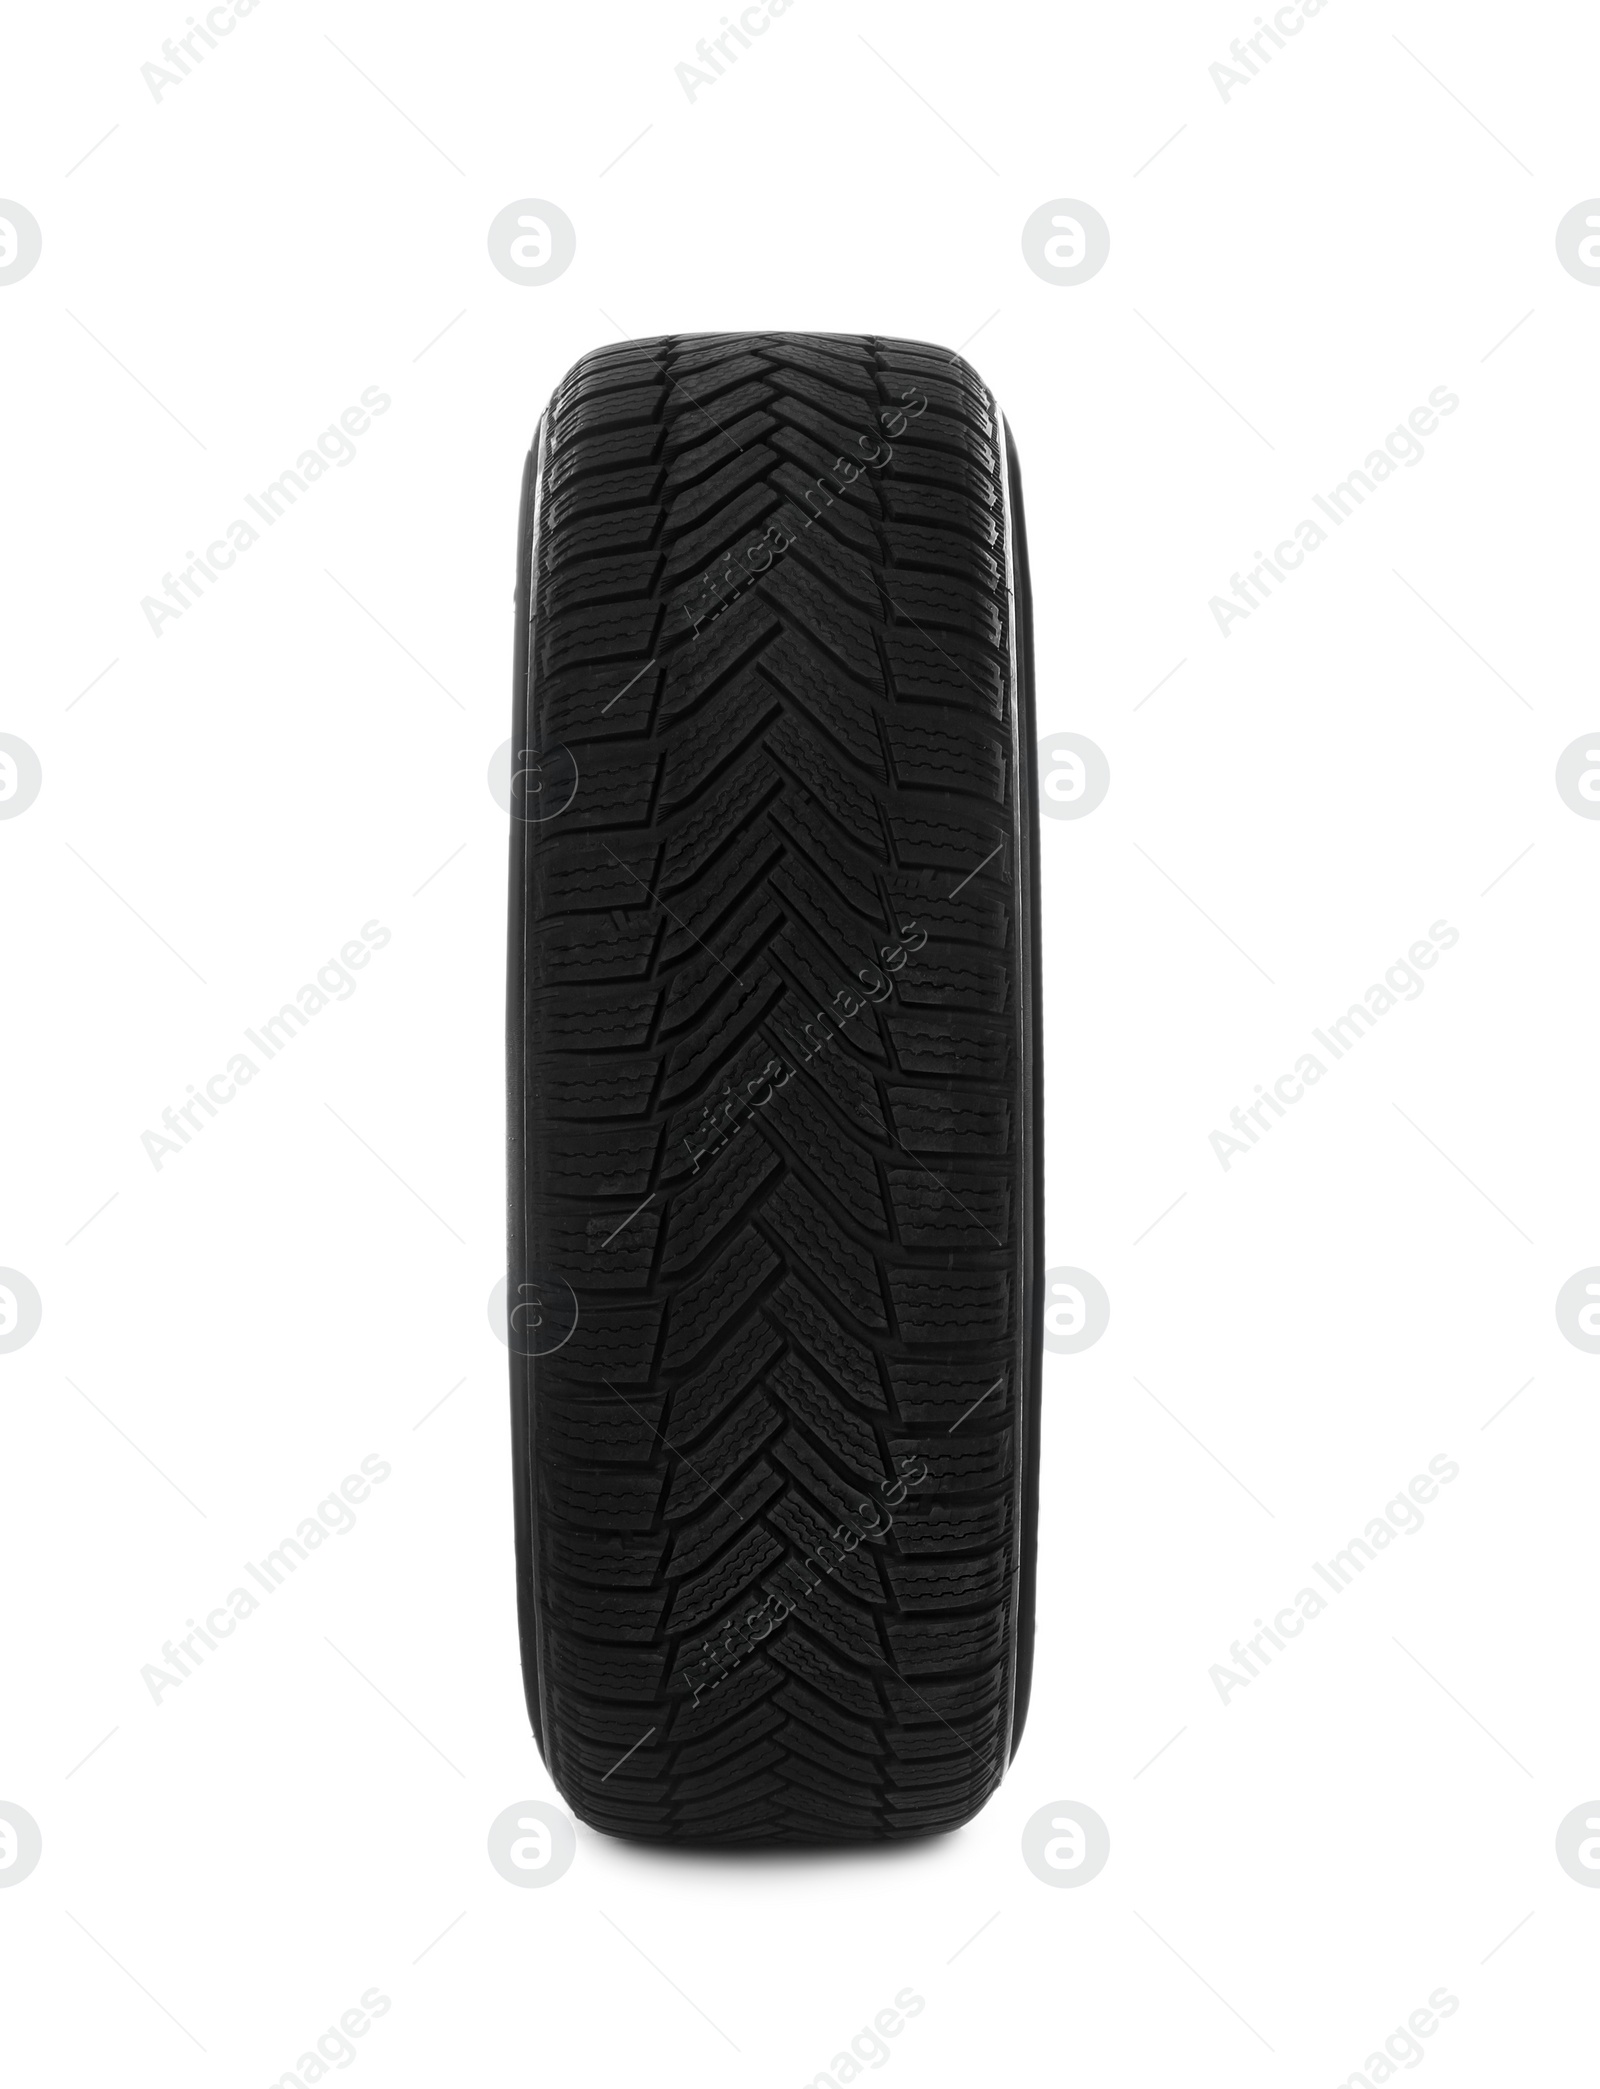 Photo of New winter tire isolated on white. Car maintenance